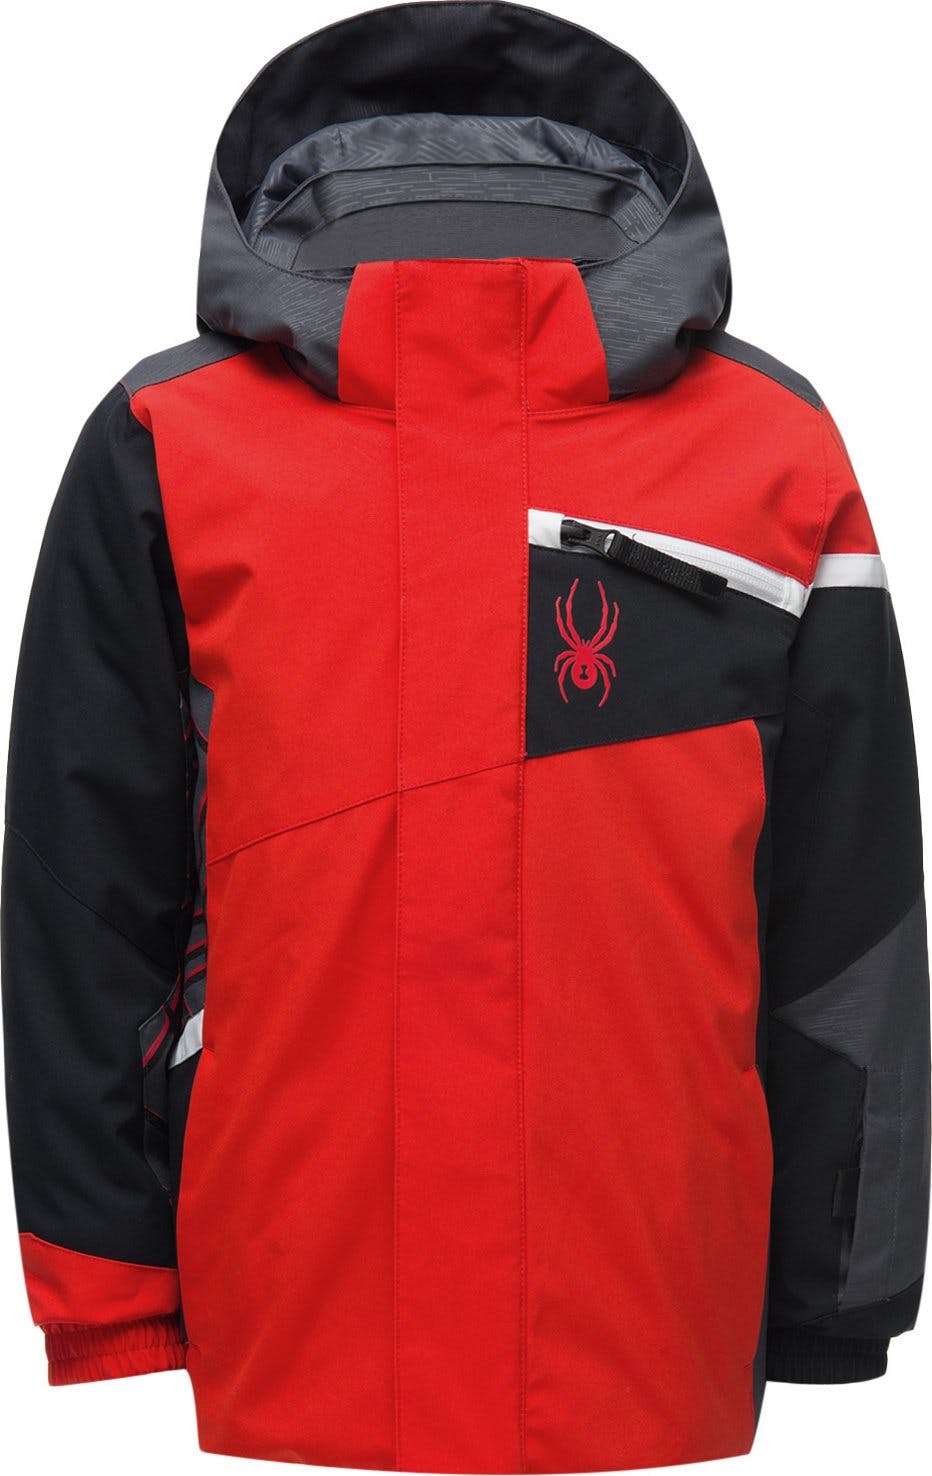 Product image for Mini Challenger Jacket - Boys